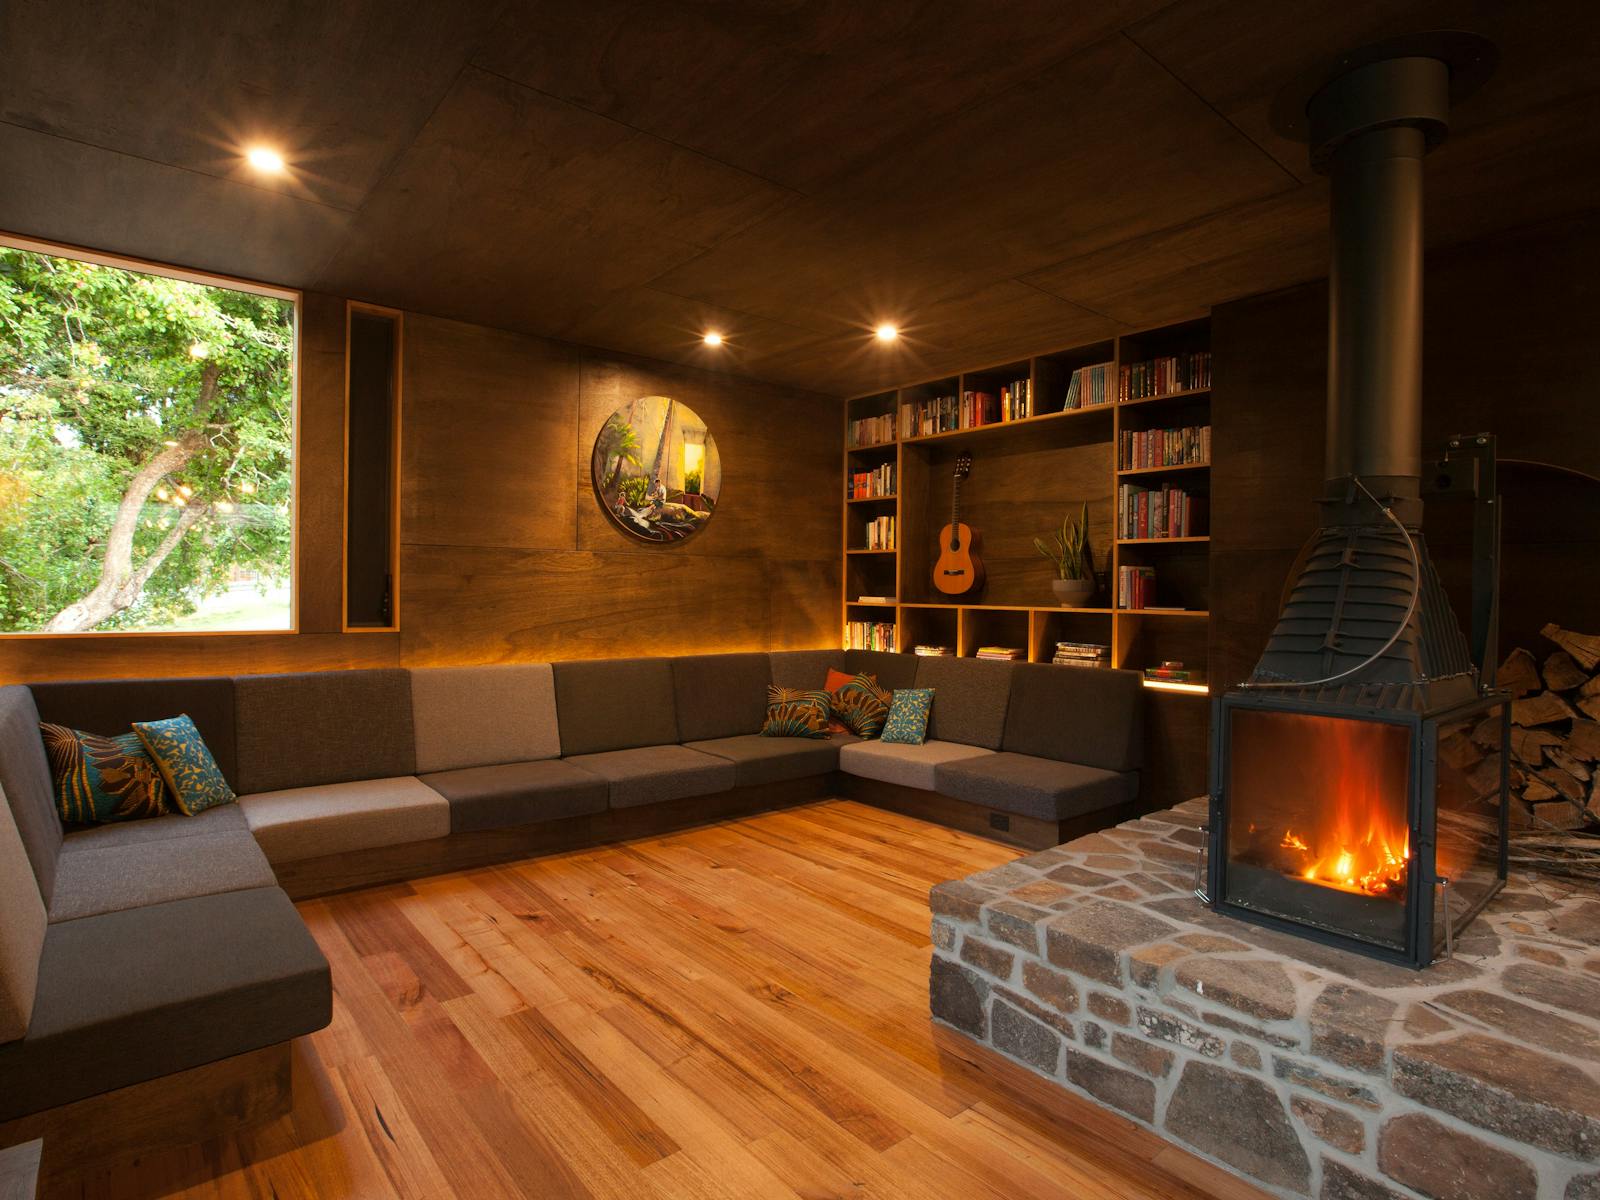 with a woodheater and plenty of room to sit together, read a book or play a game